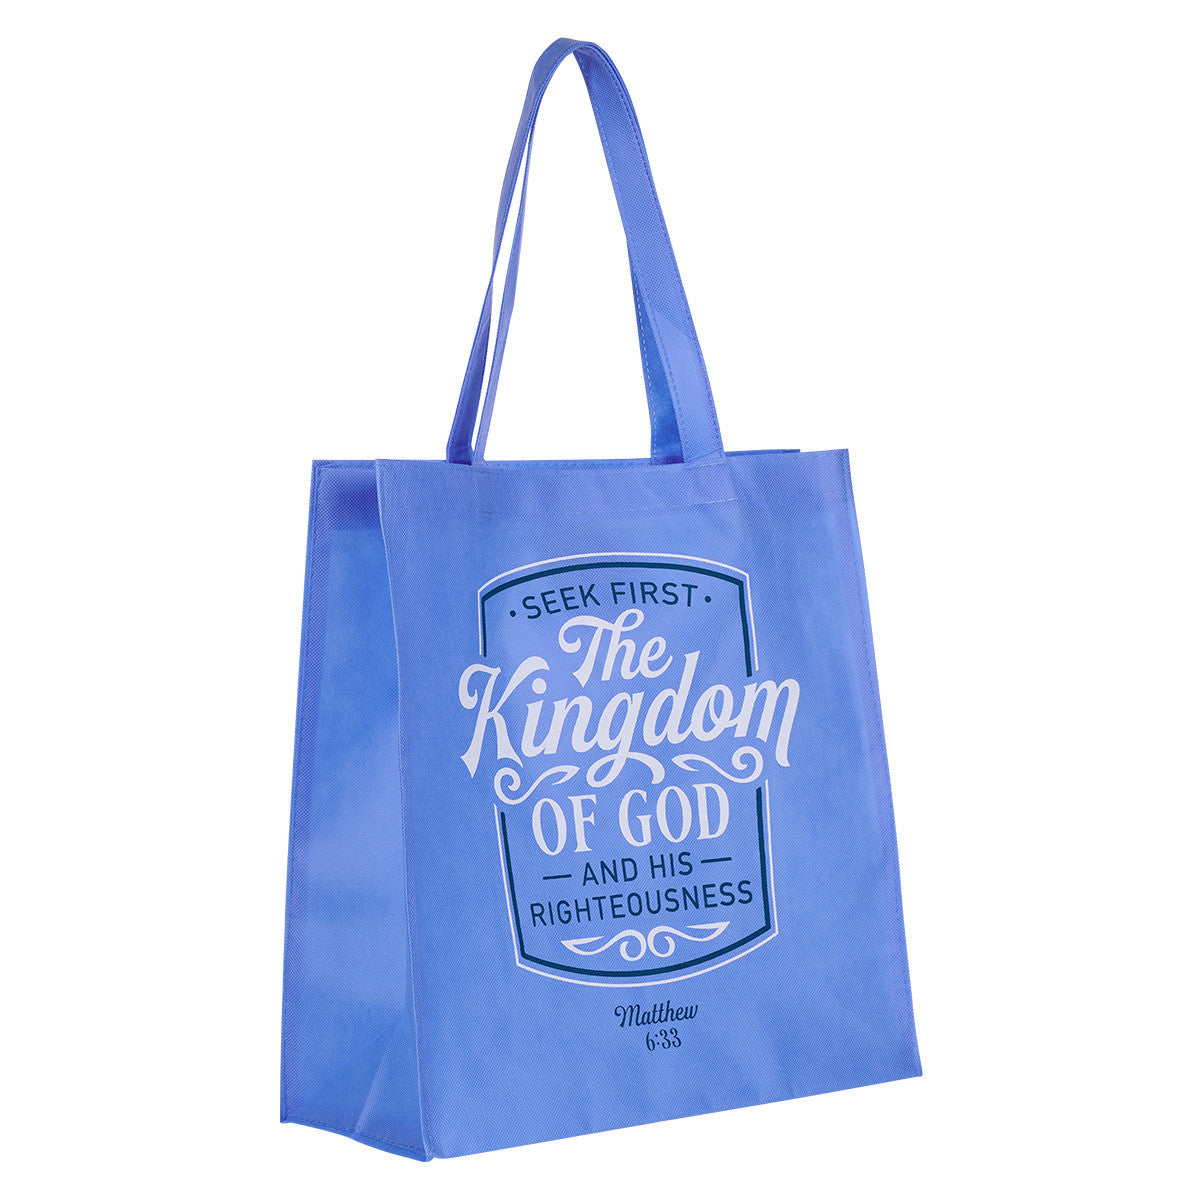 The Kingdom of God Blue Shopping Tote Bag - Matthew 6:33 - The Christian Gift Company